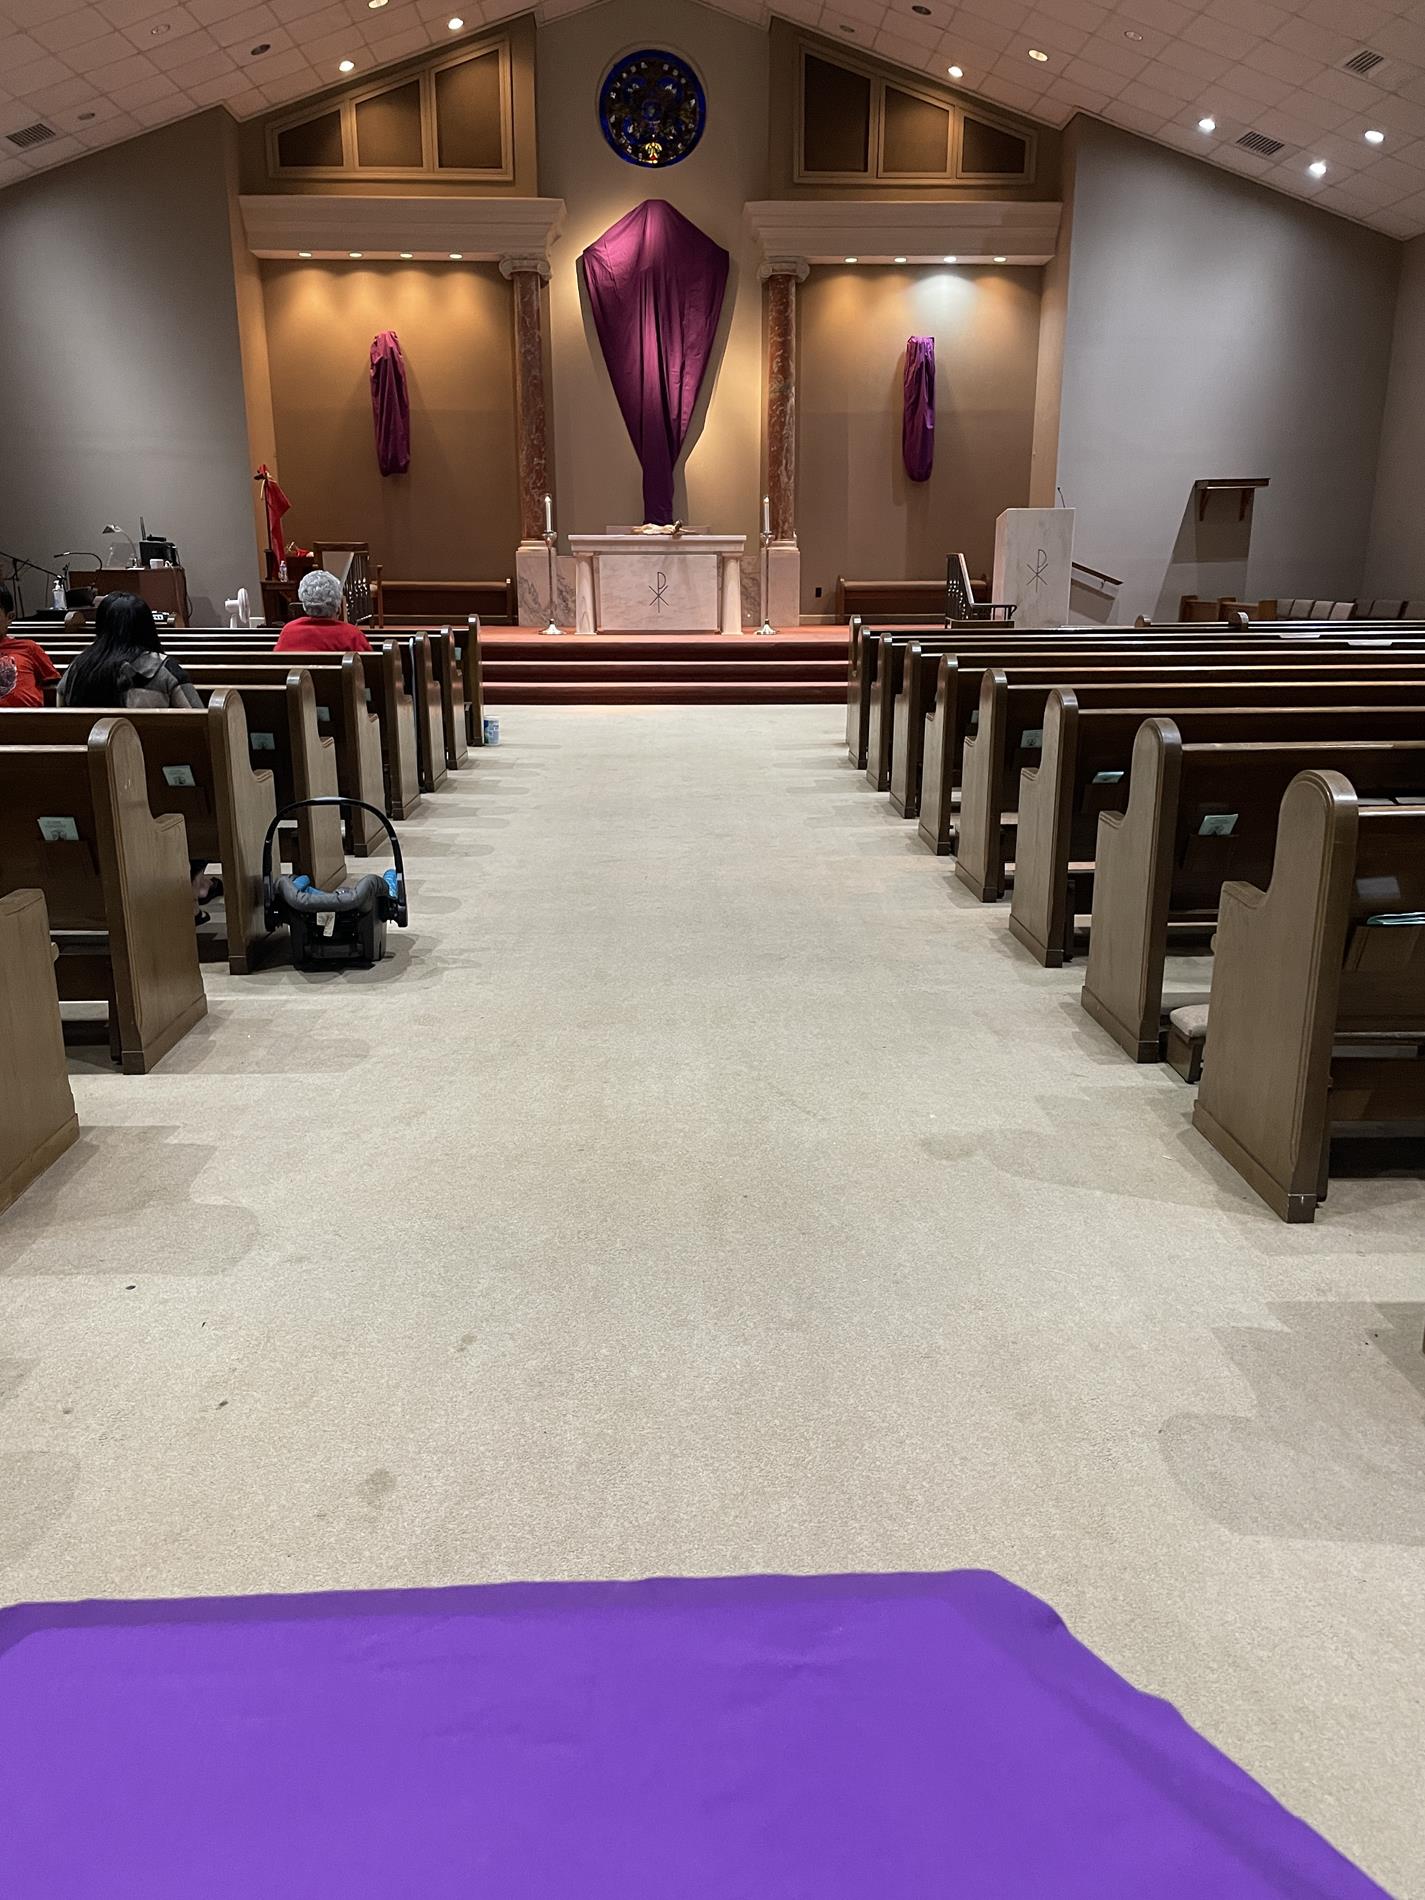 The altar is stripped